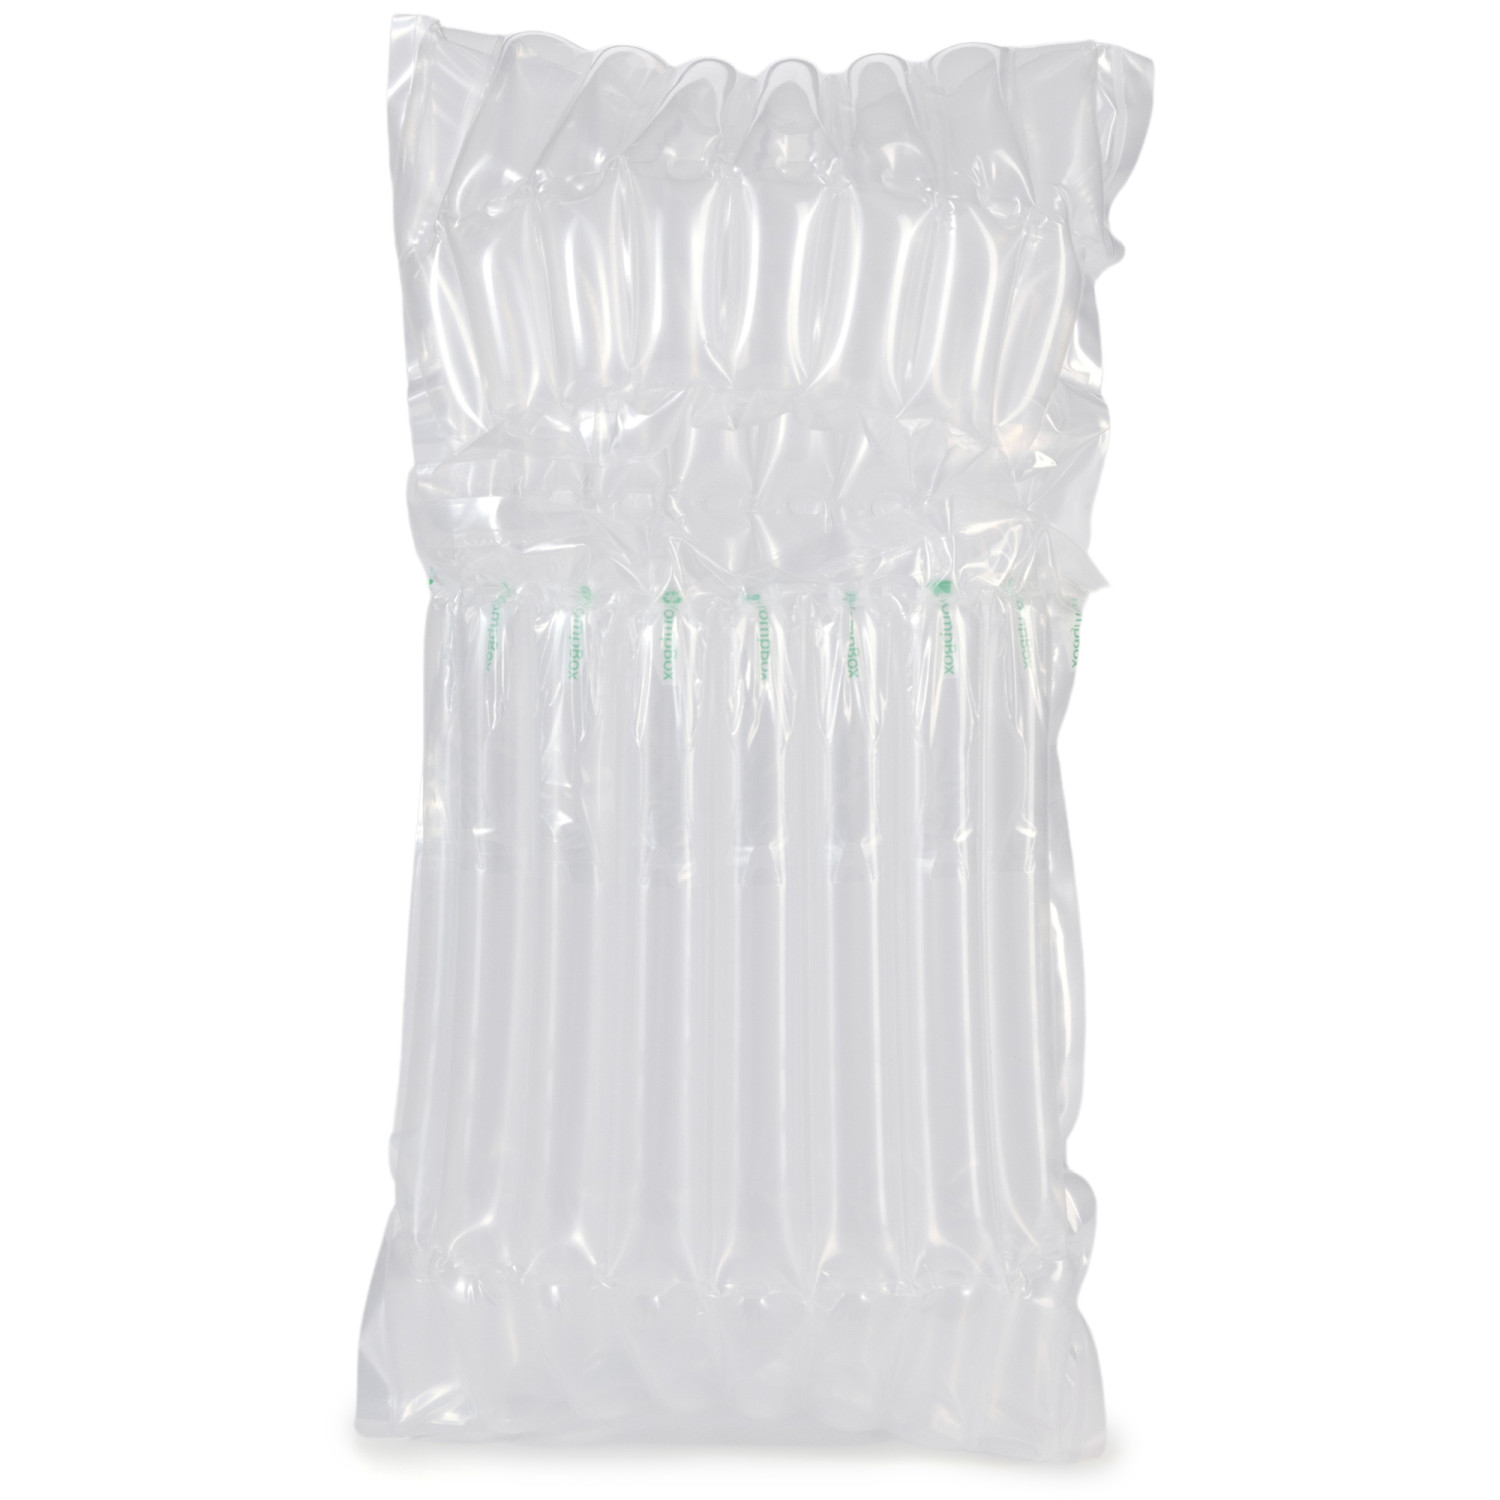 IDL Packaging Inflated 32 oz Bottle Air Bags, Self Sealed, Pack of 5 -  Reusable Air Column Bags for Packing, Travel and Shipping - Cushioning